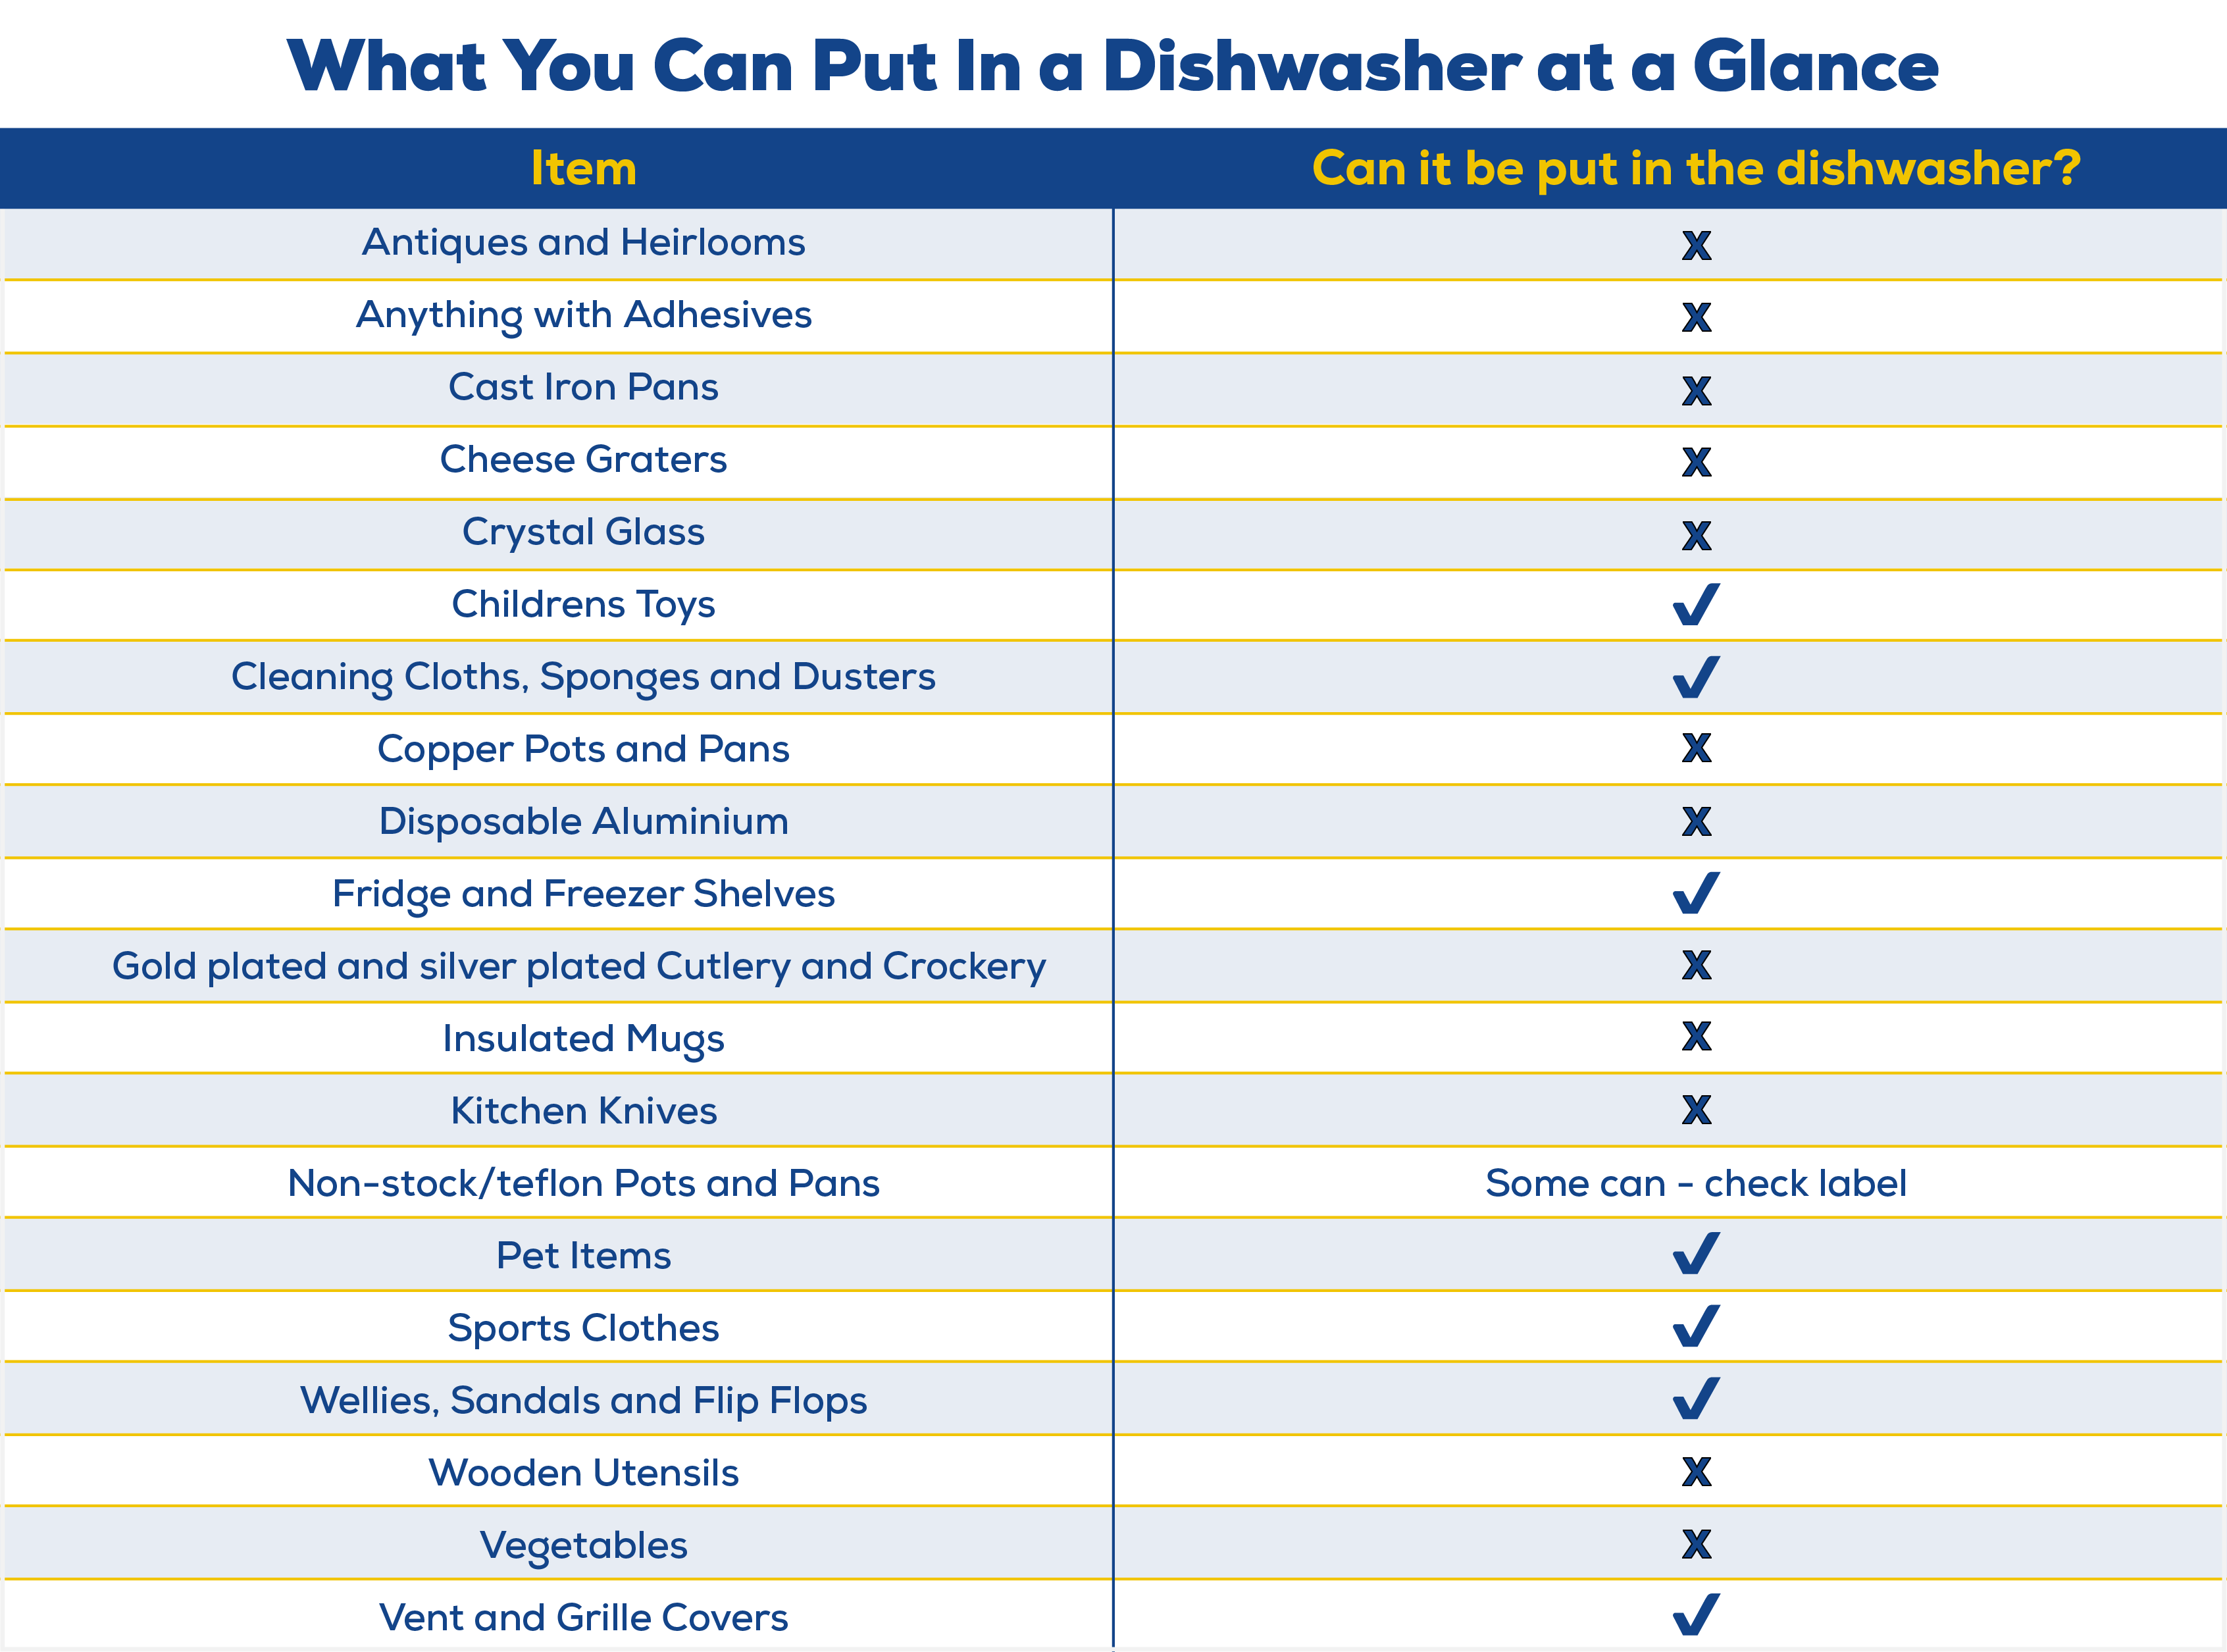 What can you put in your dishwasher